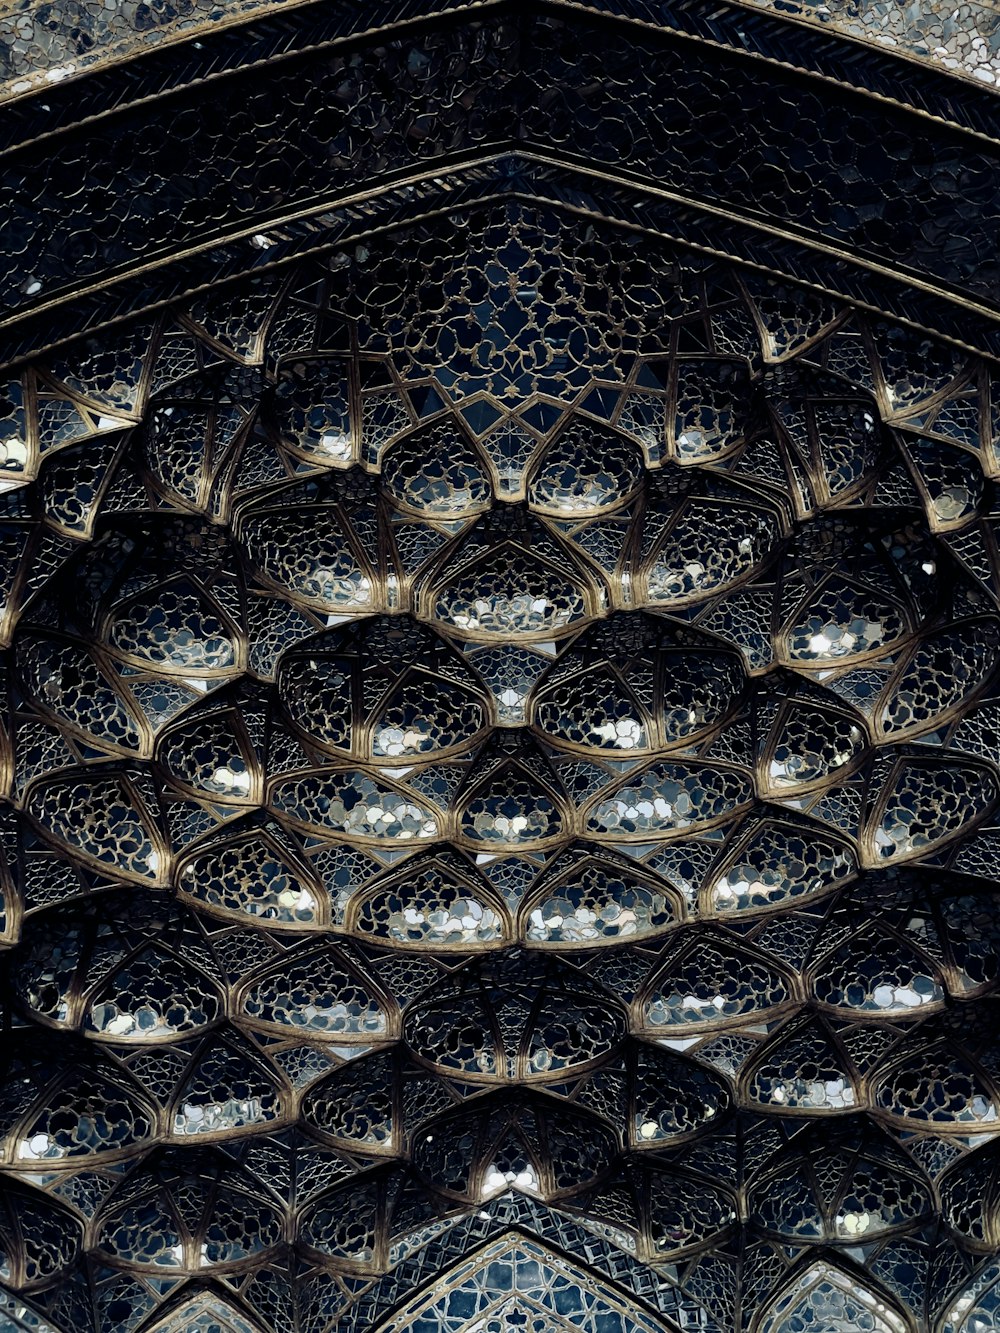 a ceiling with many intricate designs